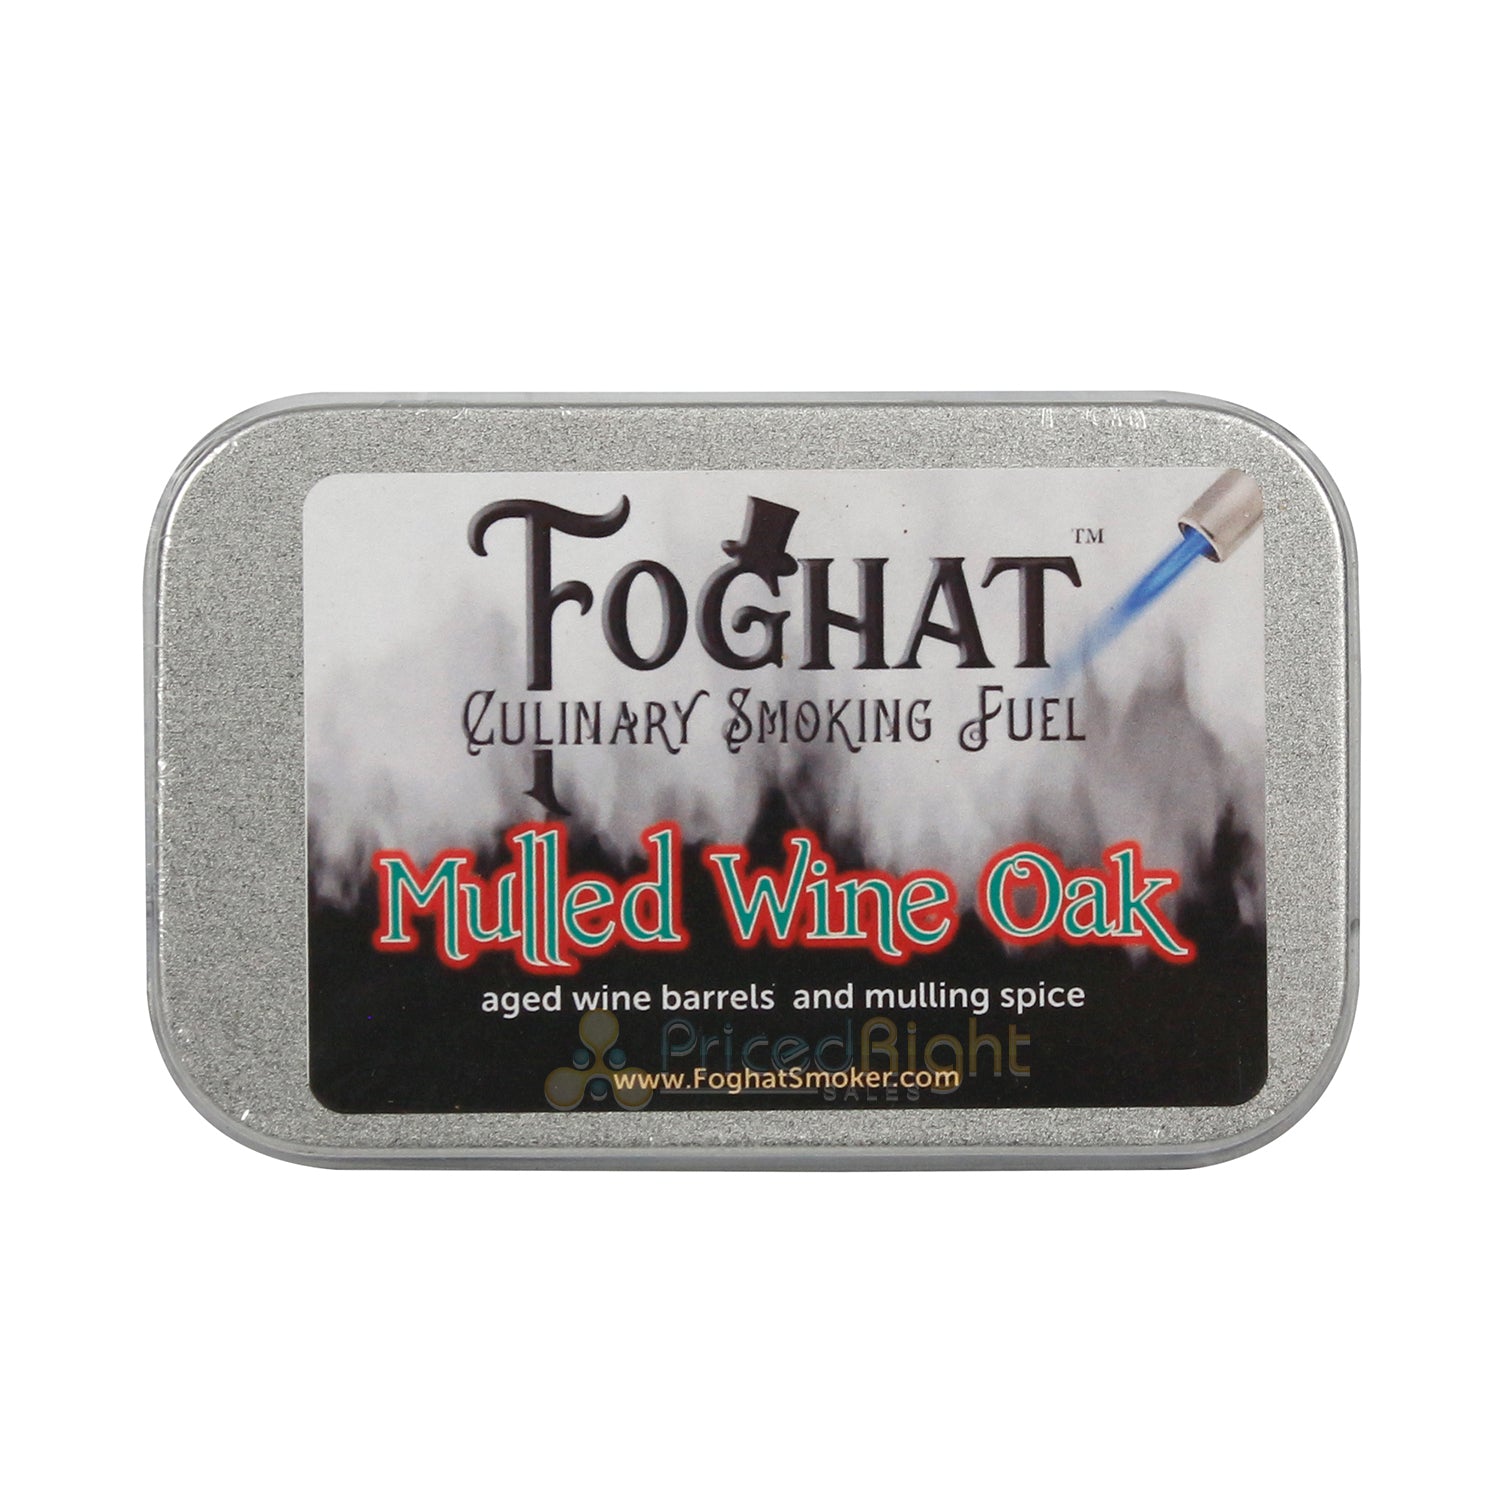 Foghat Culinary Smoking Fuel Mulled Wine Oak W/ Spice Notes All-Natural 4 Ounce